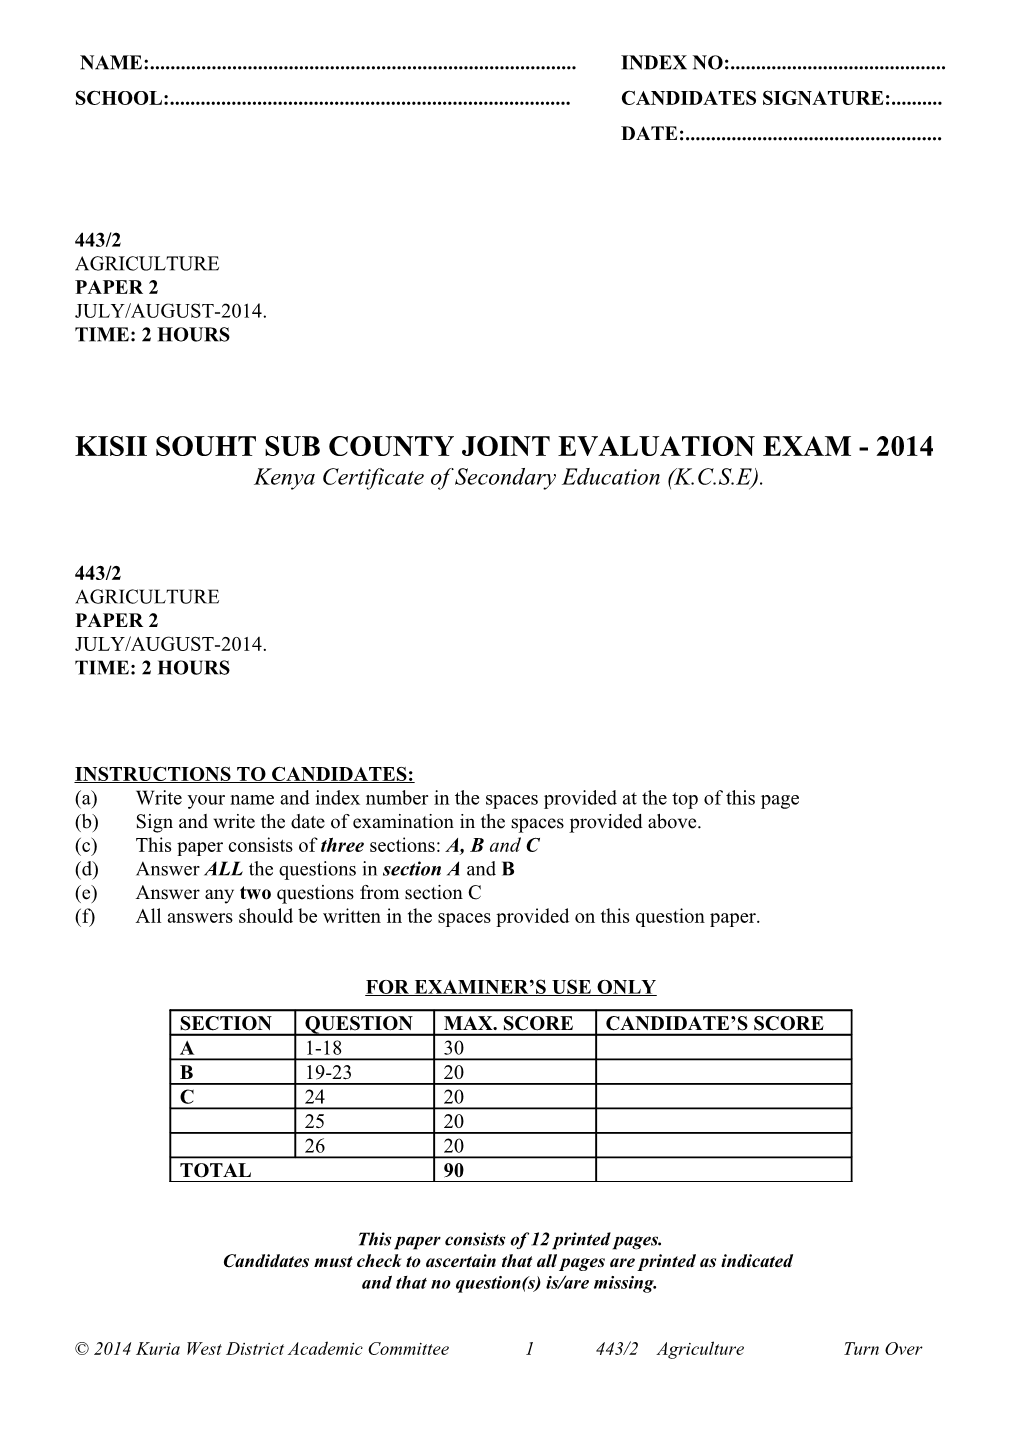 Kisii Souht Sub County Joint Evaluation Exam - 2014